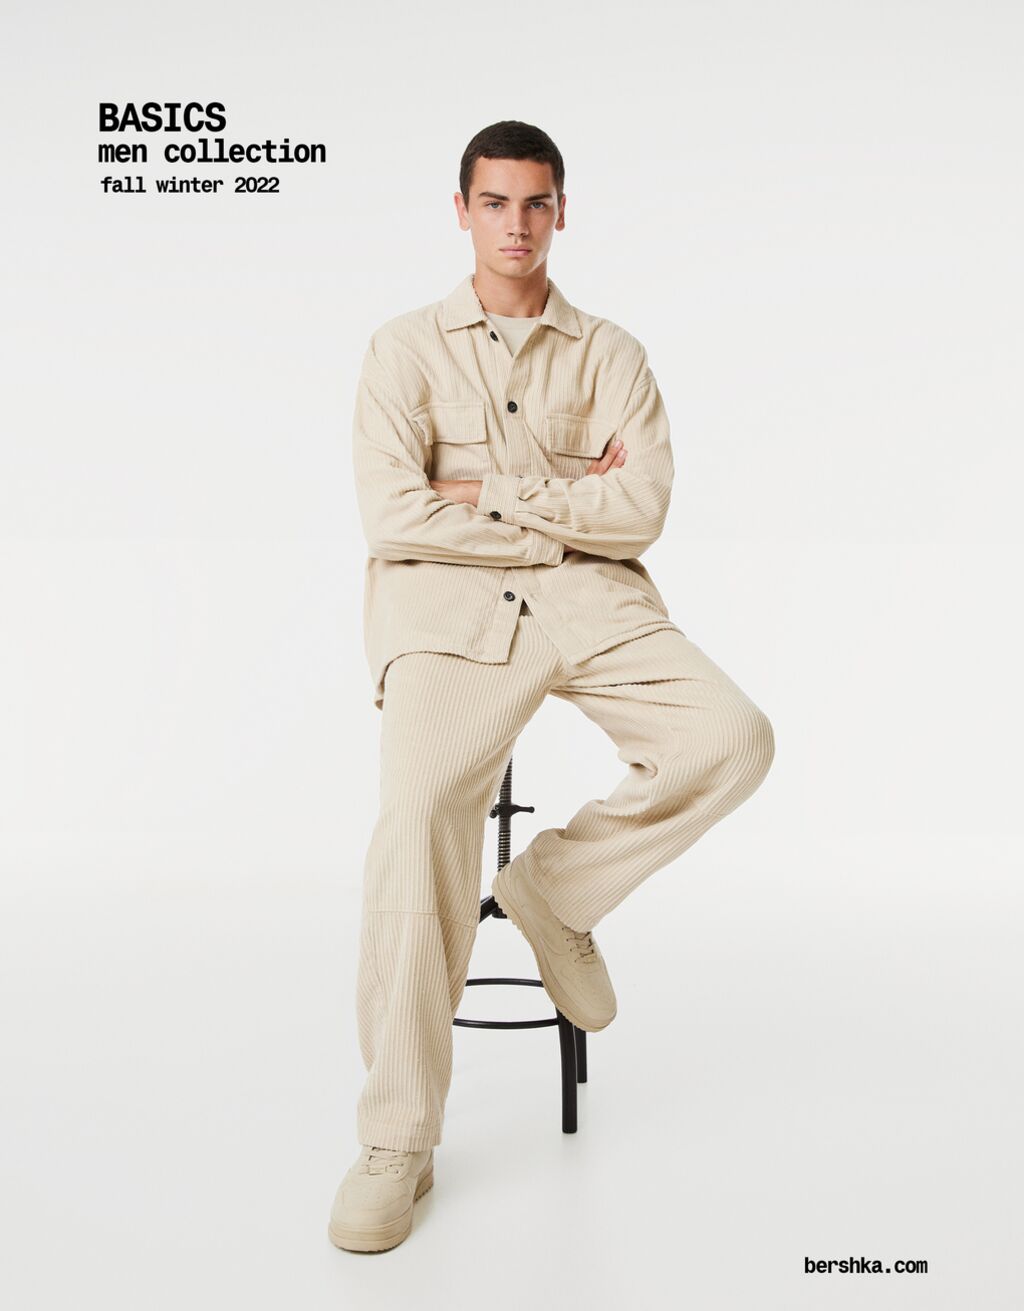 Corduroy overshirt and trousers set